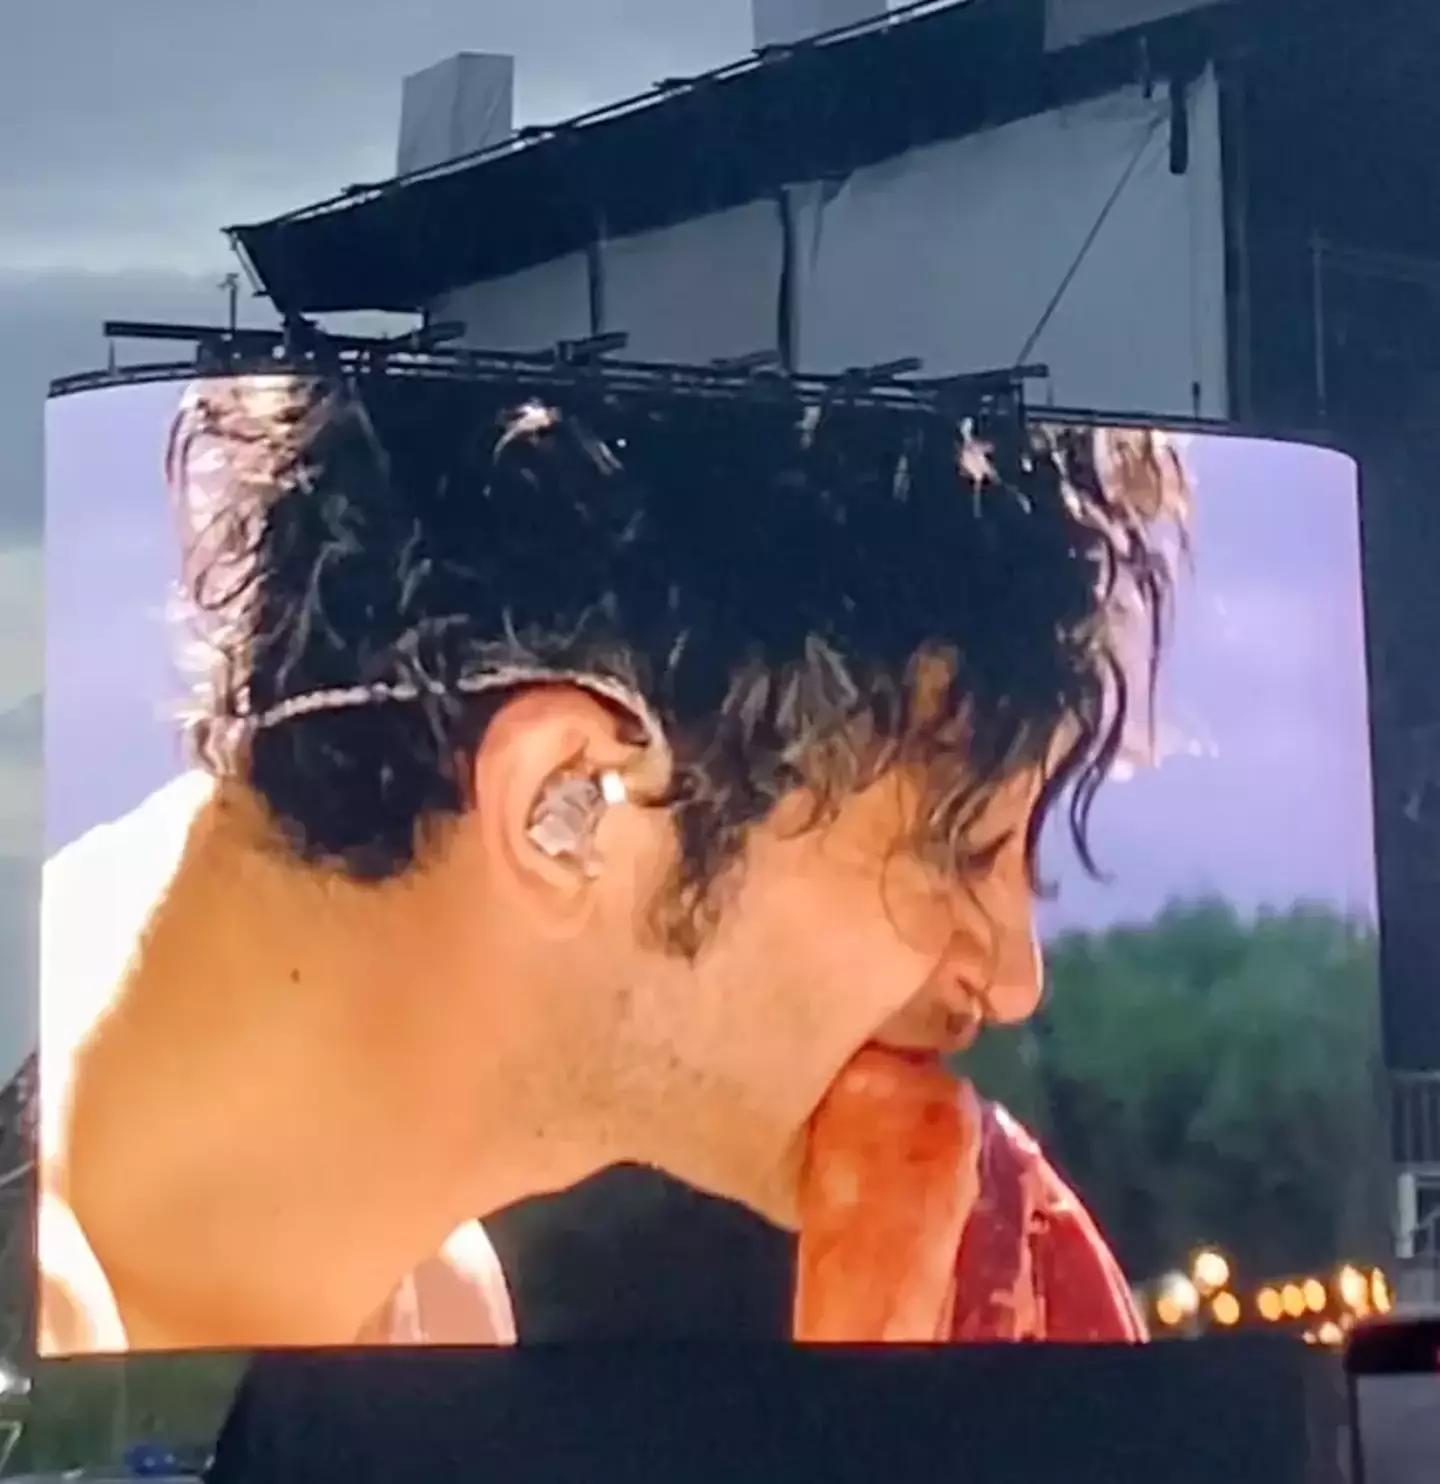 Matty Healy chowed down on raw steak at his Finsbury Park gig.